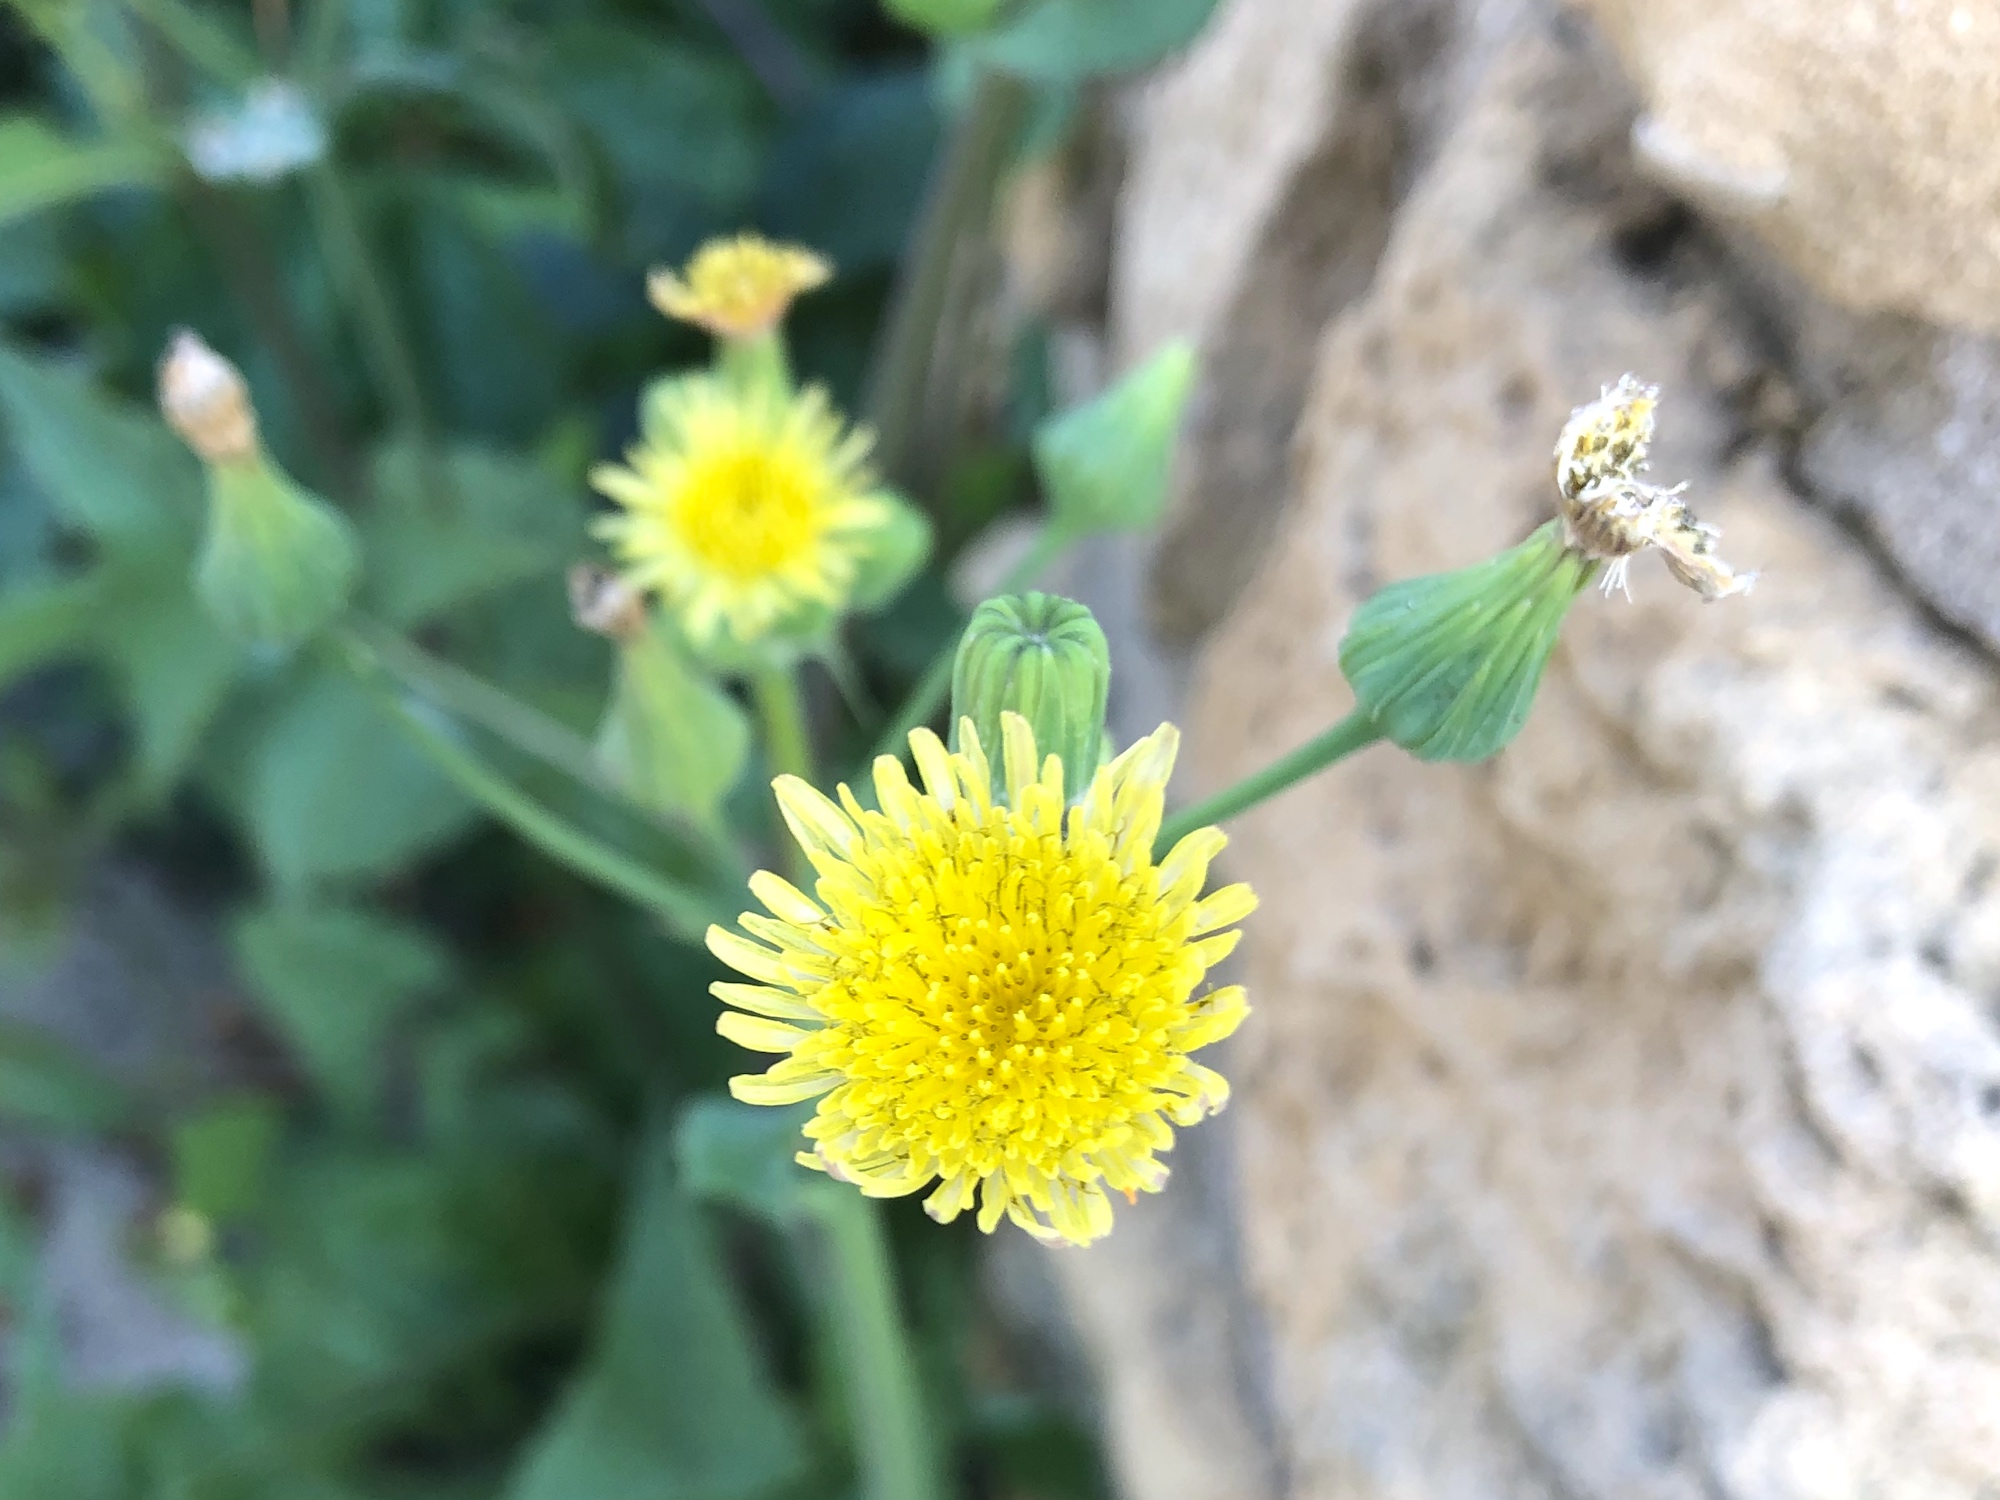 Common Sowthistle along Duck Pond stone wall on July 9, 2019.